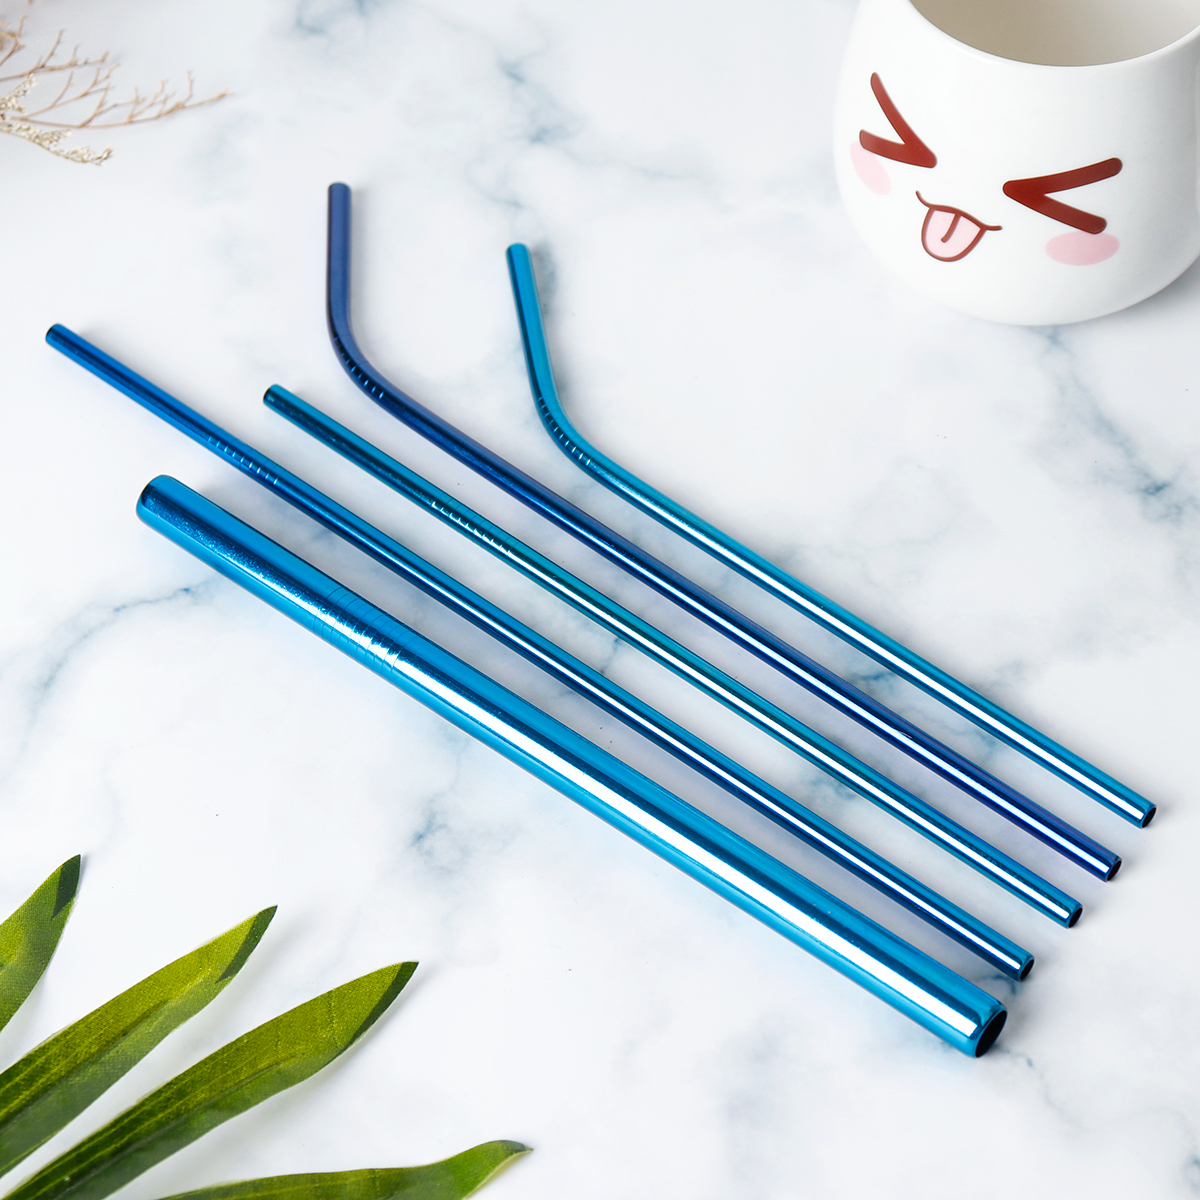 Portable-Metal-Straw-Set-304-Stainless-Steel-Straws-Reusable-Metal-Drinking-Straws-With-Cleaning-Bru-1532046-3